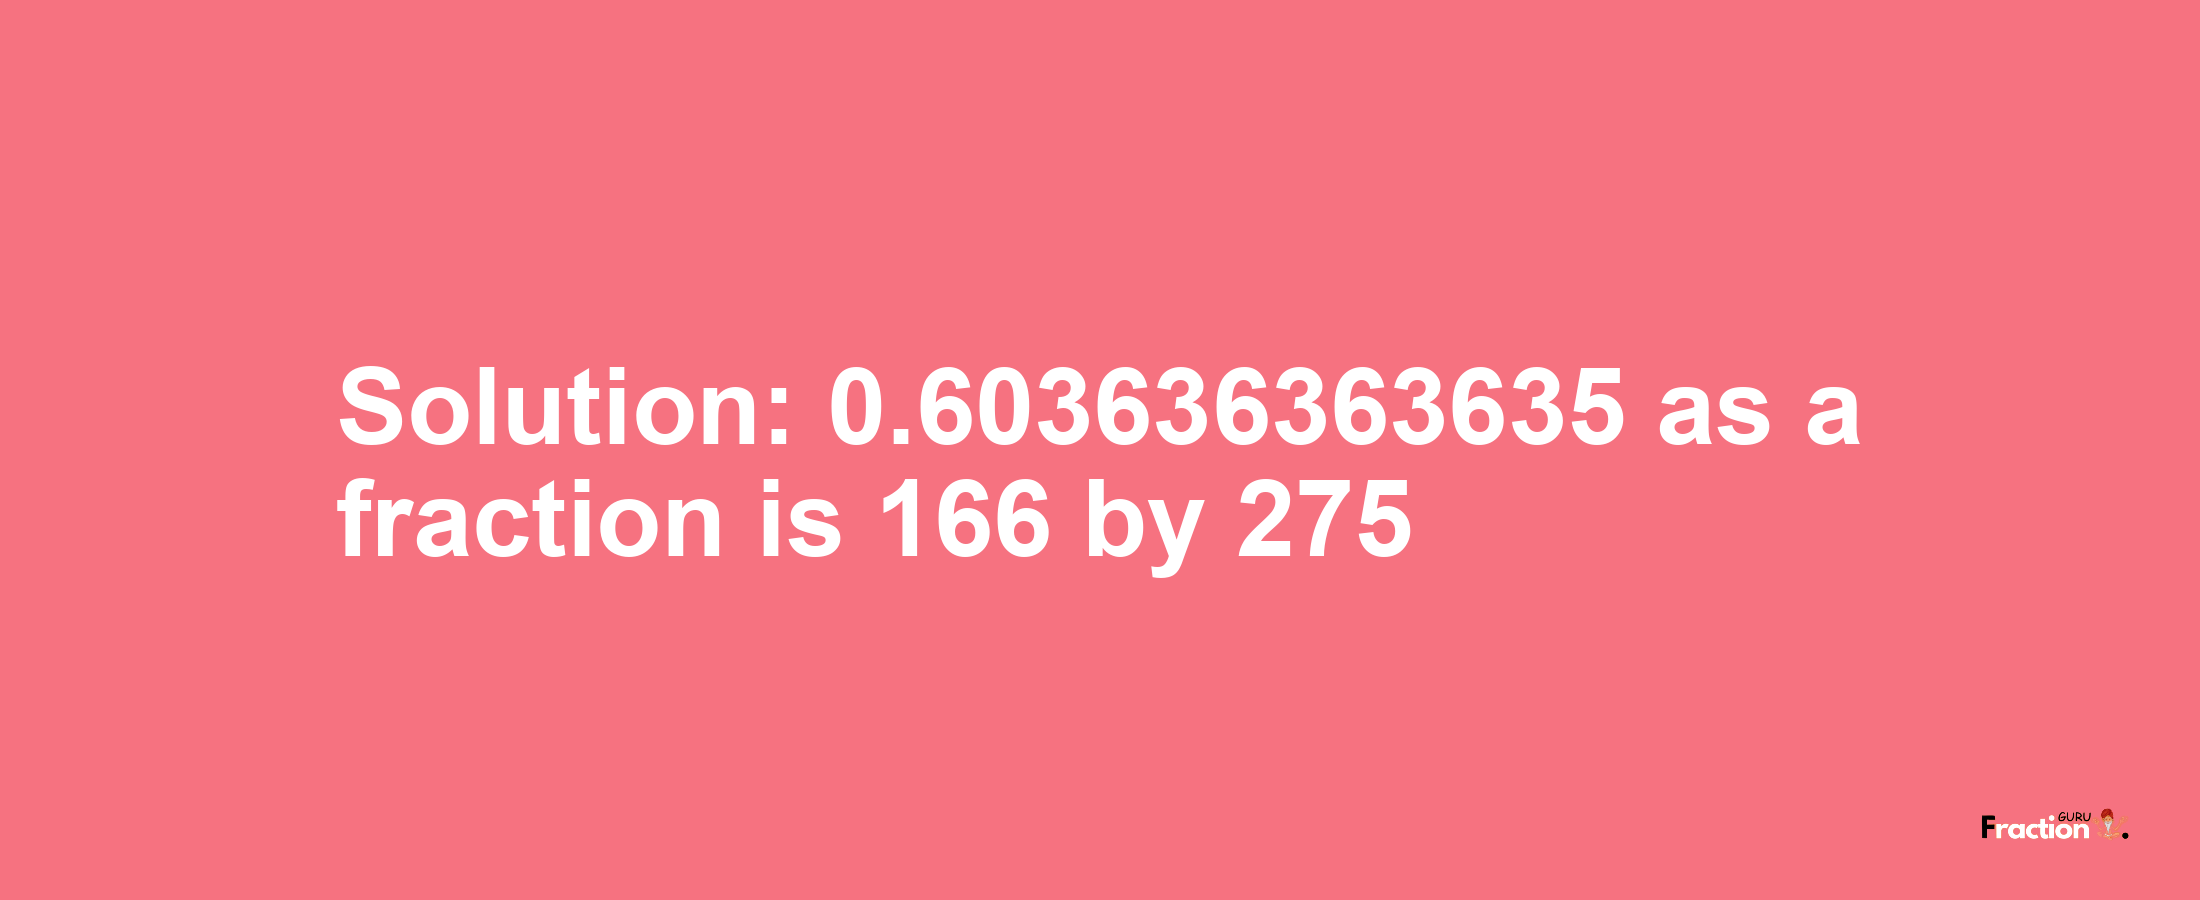 Solution:0.603636363635 as a fraction is 166/275